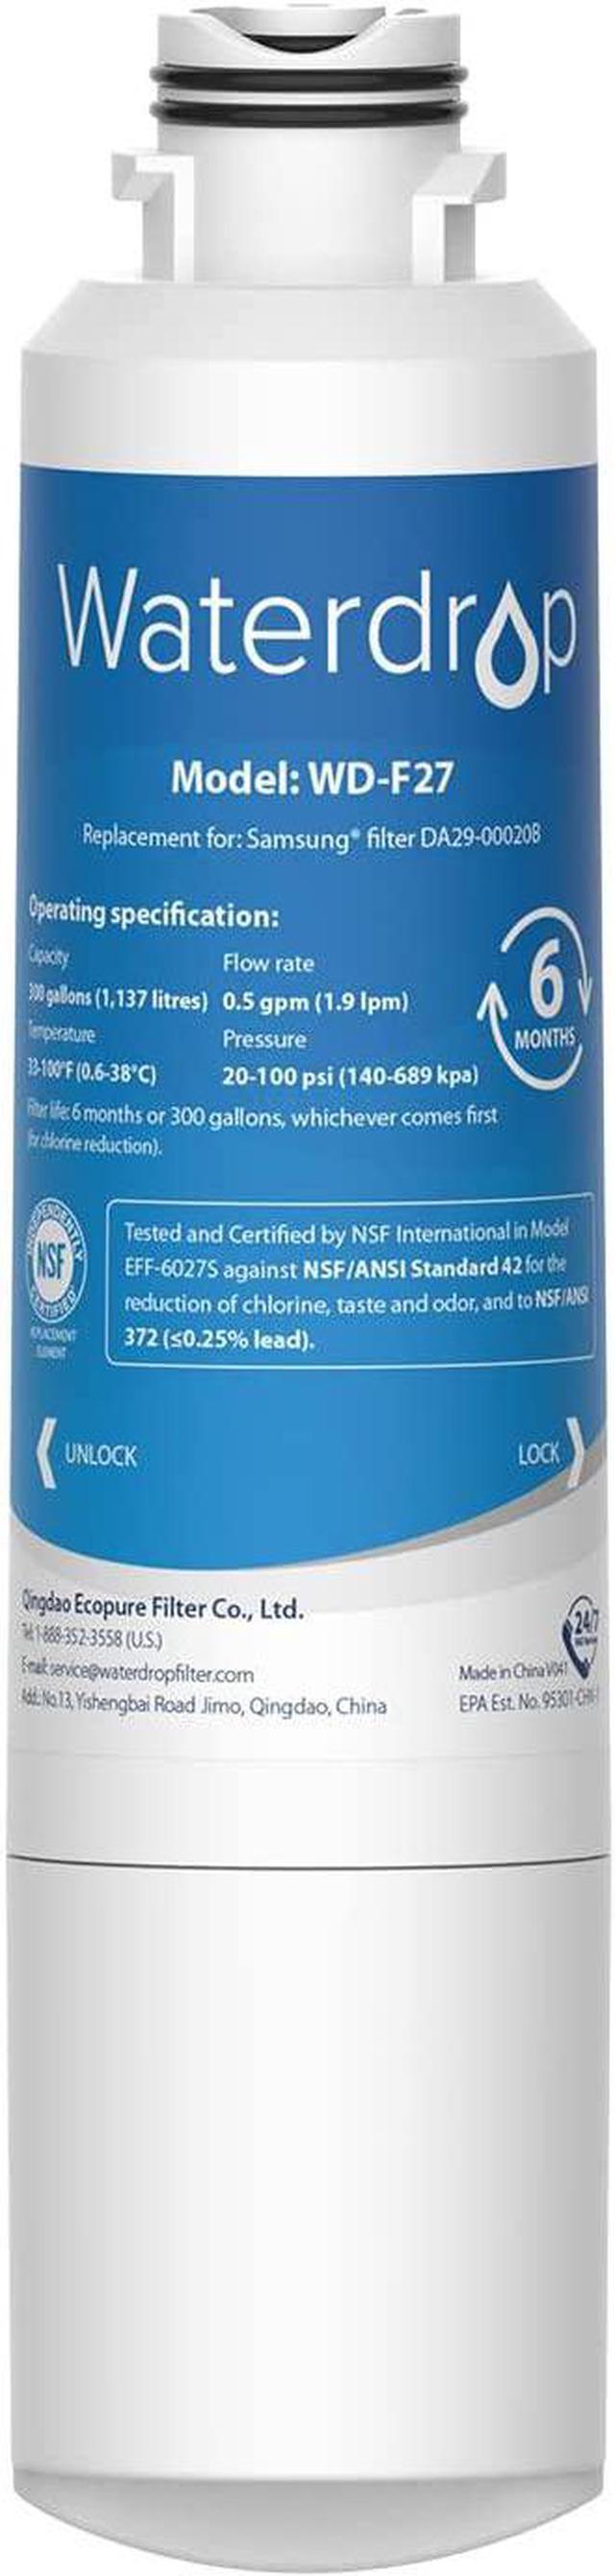 Waterdrop DA29-00020B Replacement for Samsung DA29-00020A, HAF-CIN/EXP,  46-9101 Refrigerator Water Filter, Package may vary 